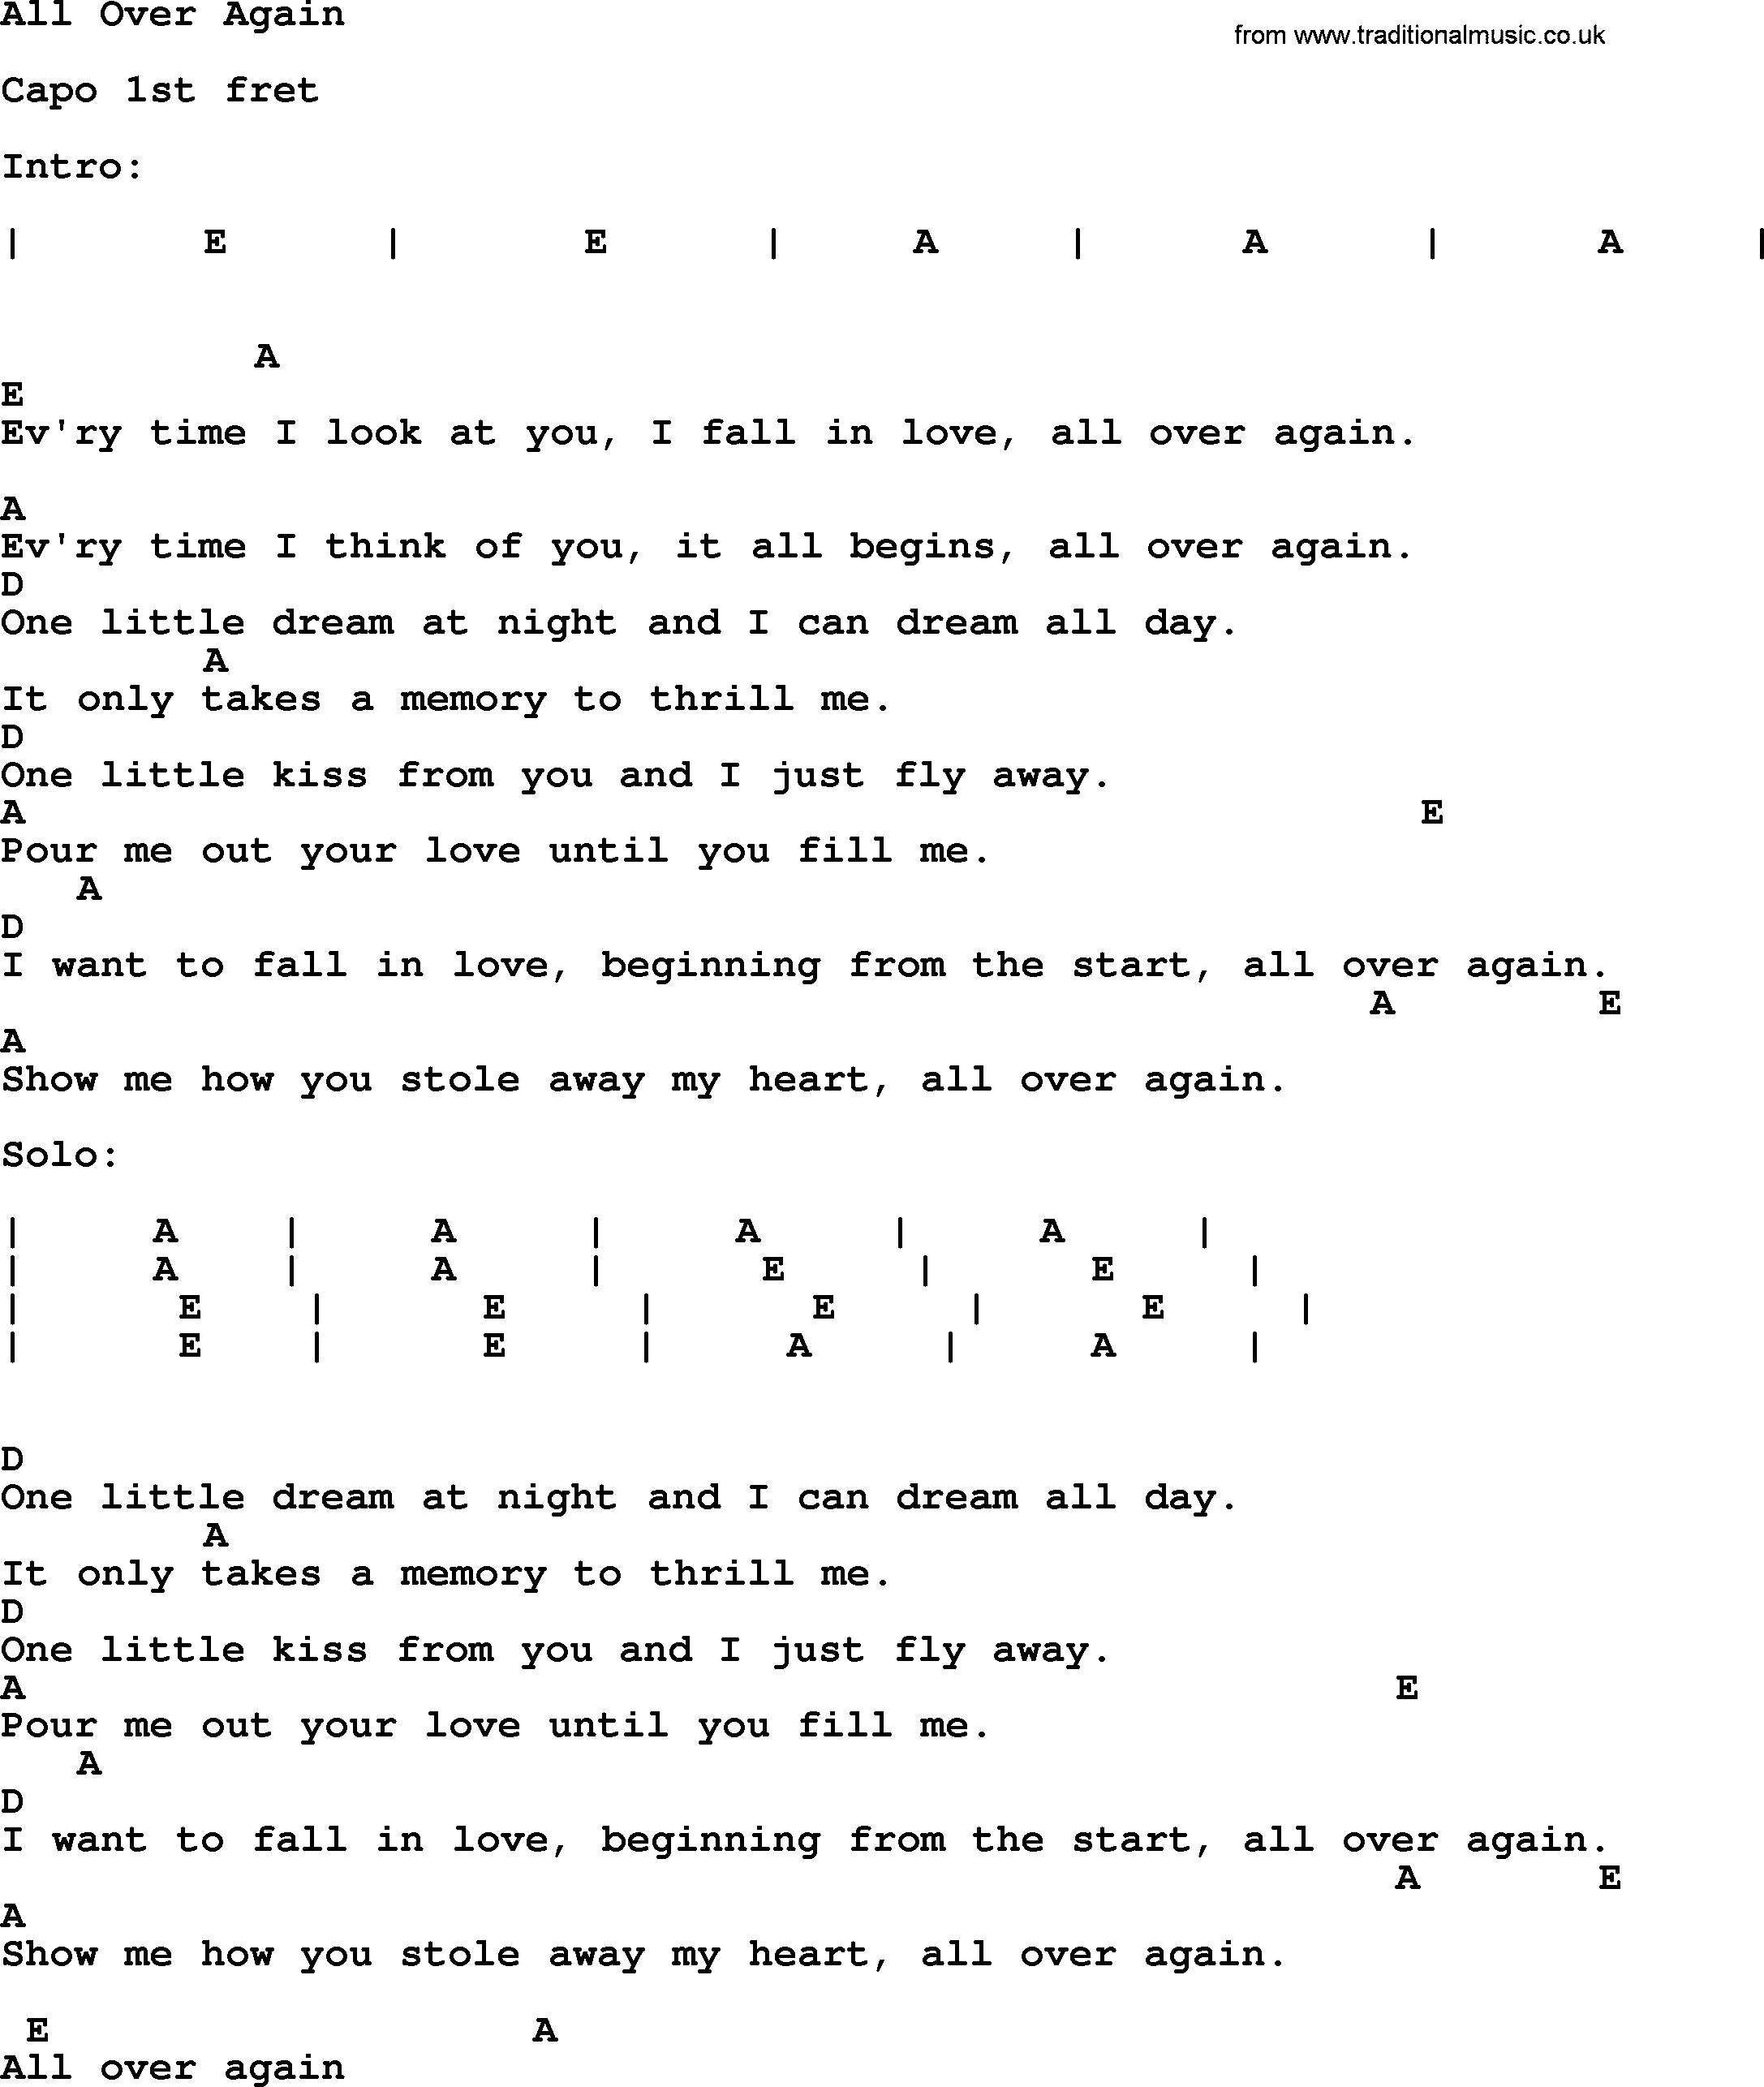 Johnny Cash song All Over Again, lyrics and chords